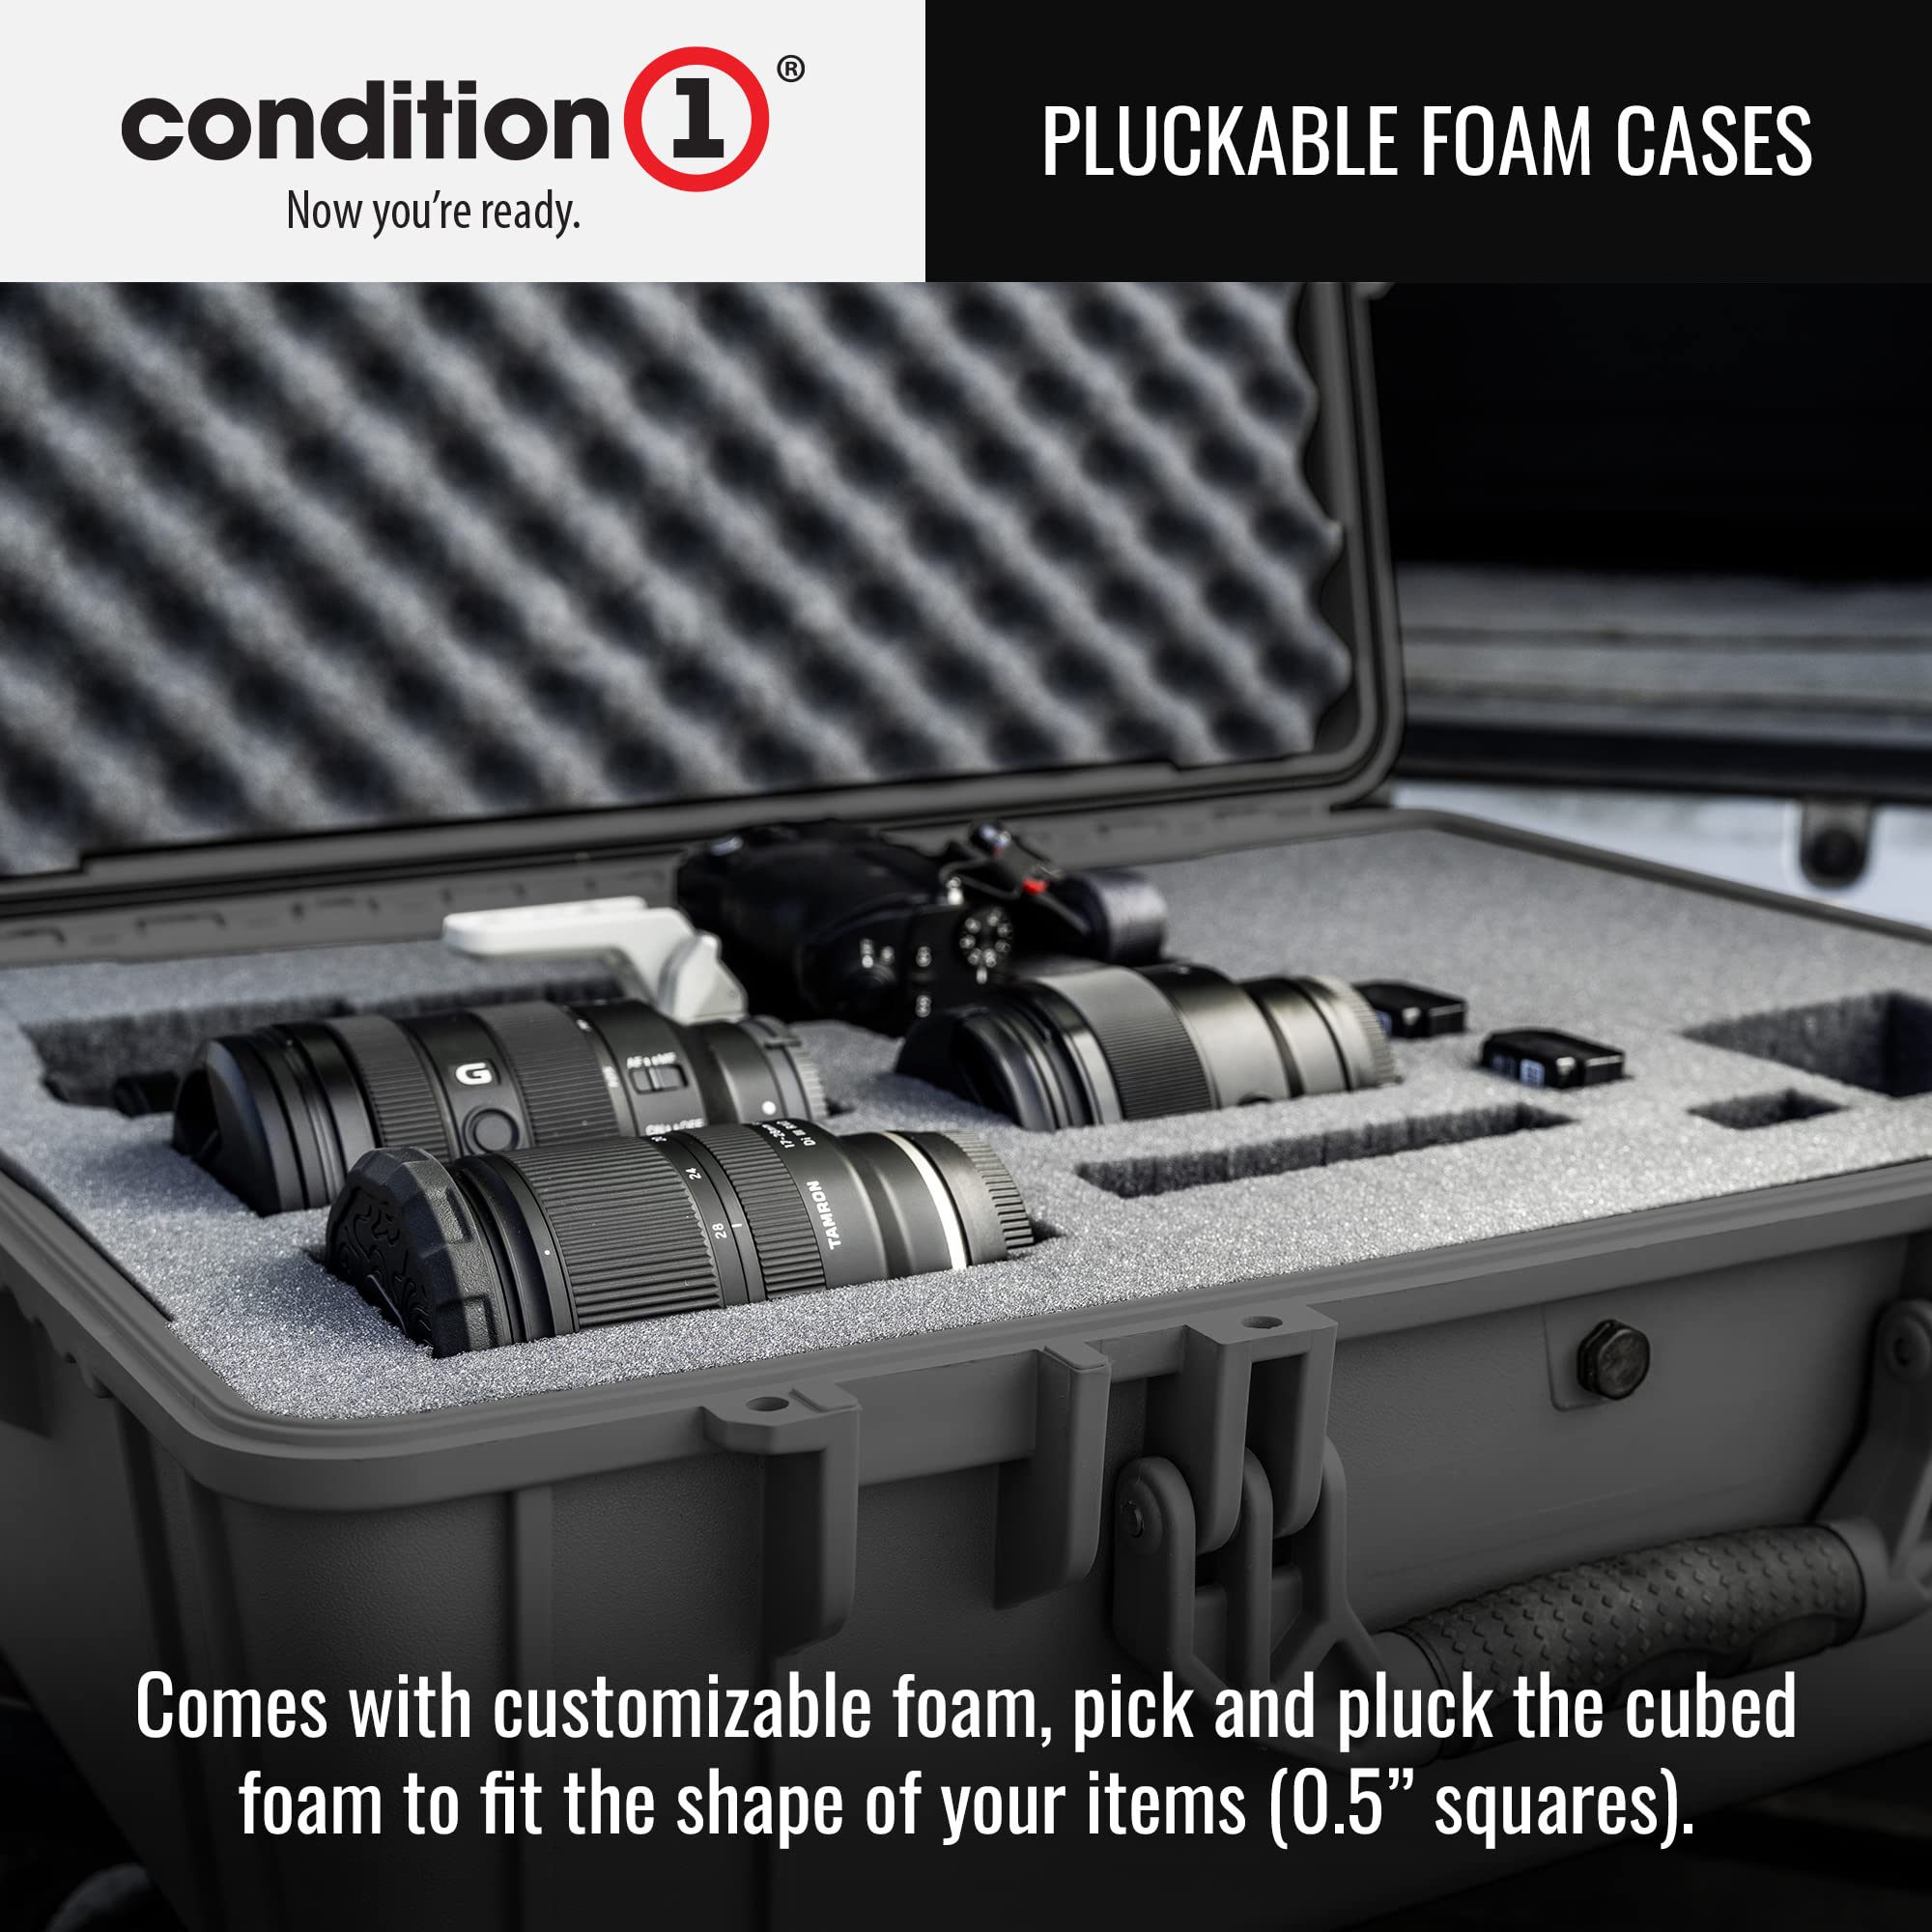 Condition 1 Large Waterproof Hard Travel Case Heavy-Duty Protective Portable Storage Box, Camera, Tool, Hunting, Military Tactical Watertight Cases, 25